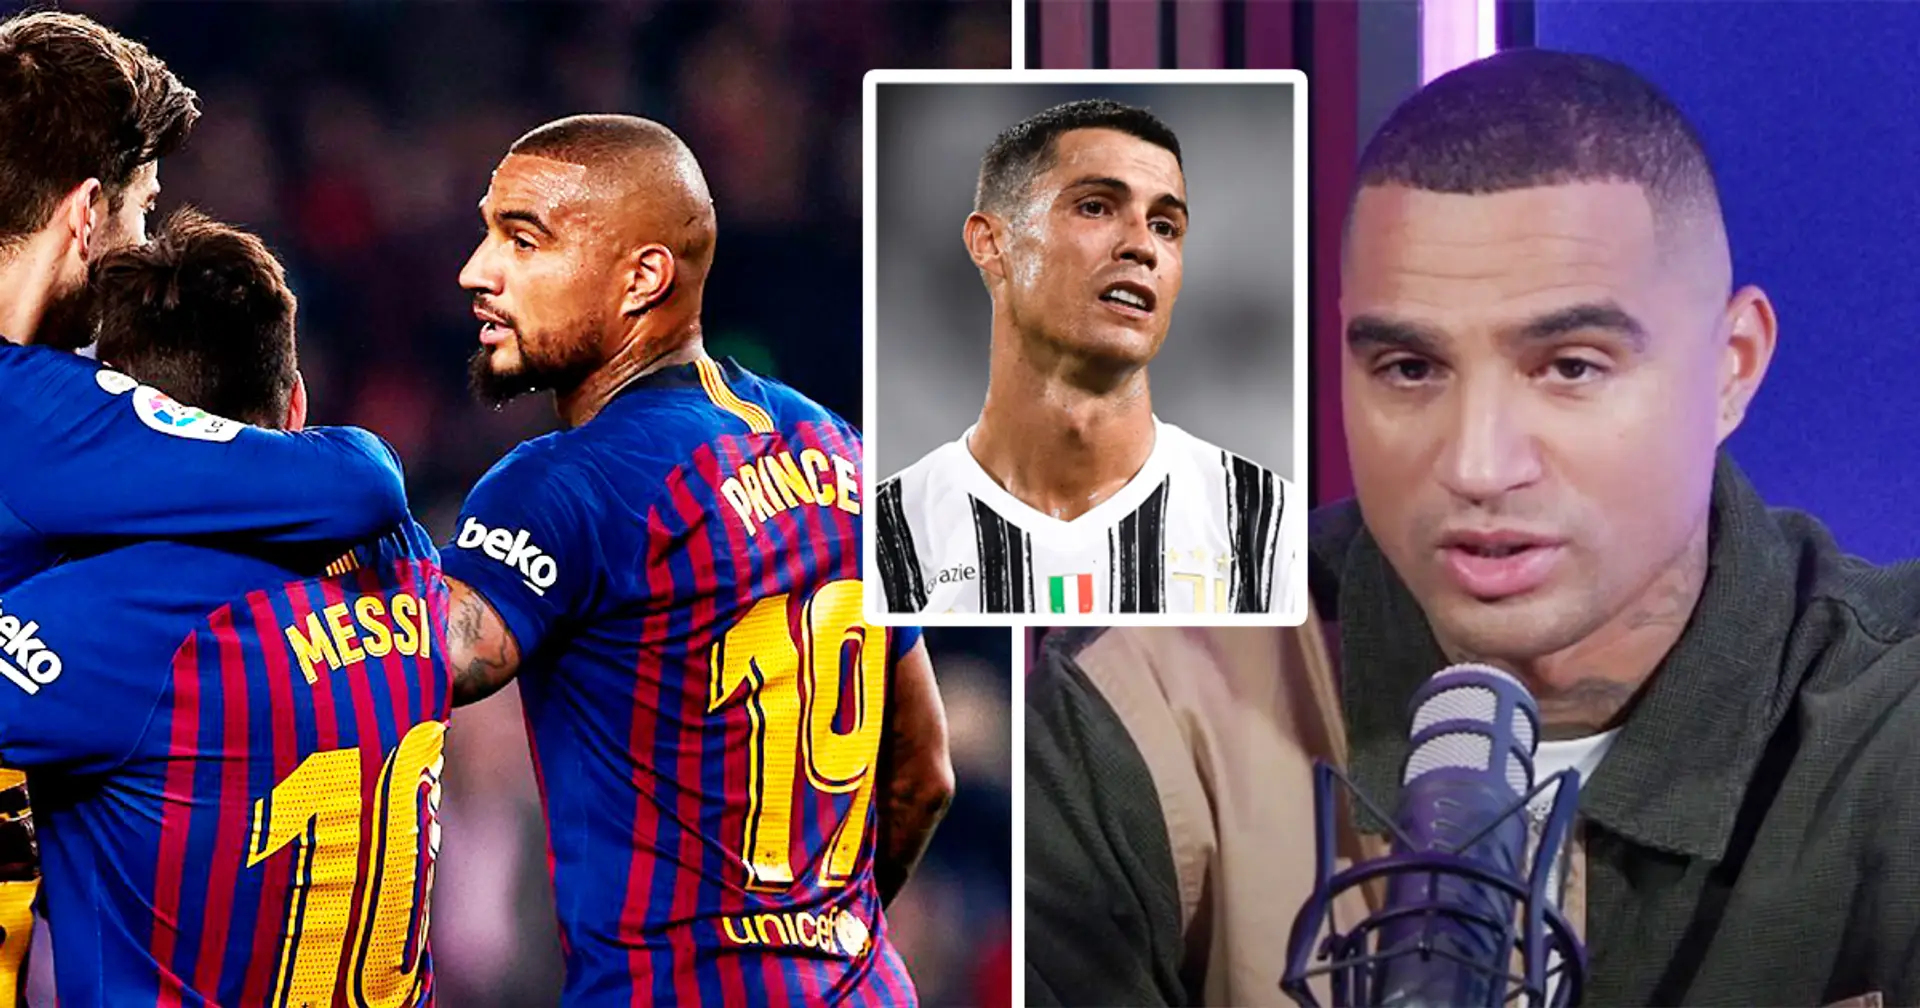 'I usually always say the truth': Boateng says he was forced to lie ...